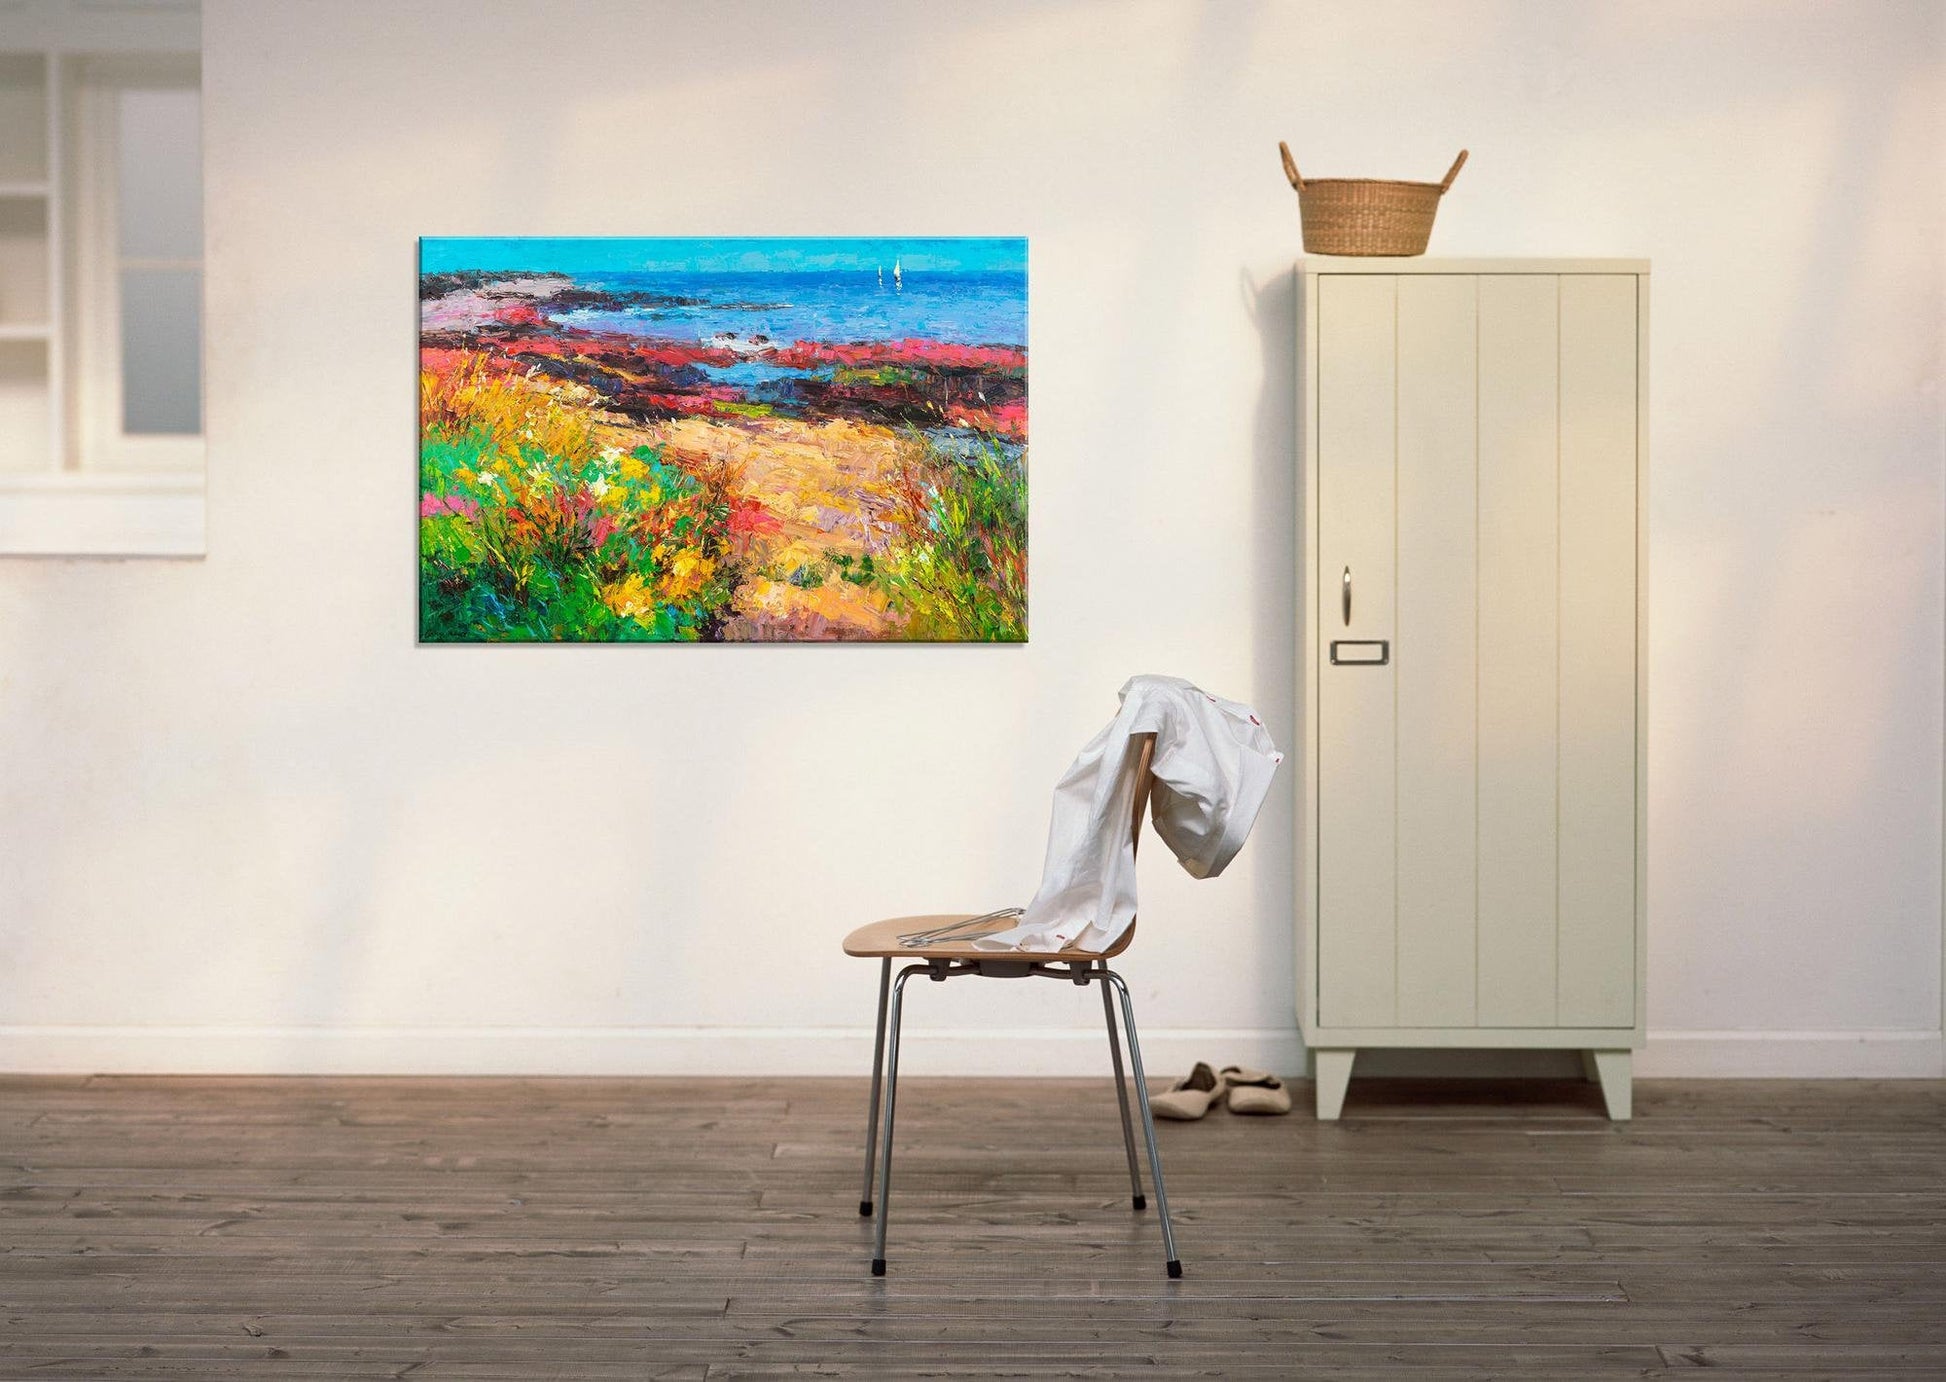 Oil Painting Landscape Flowers By The Sea, Canvas Painting, Oil Painting, Large Landscape Paintings On Canvas, Large Wall Art, Handmade Art